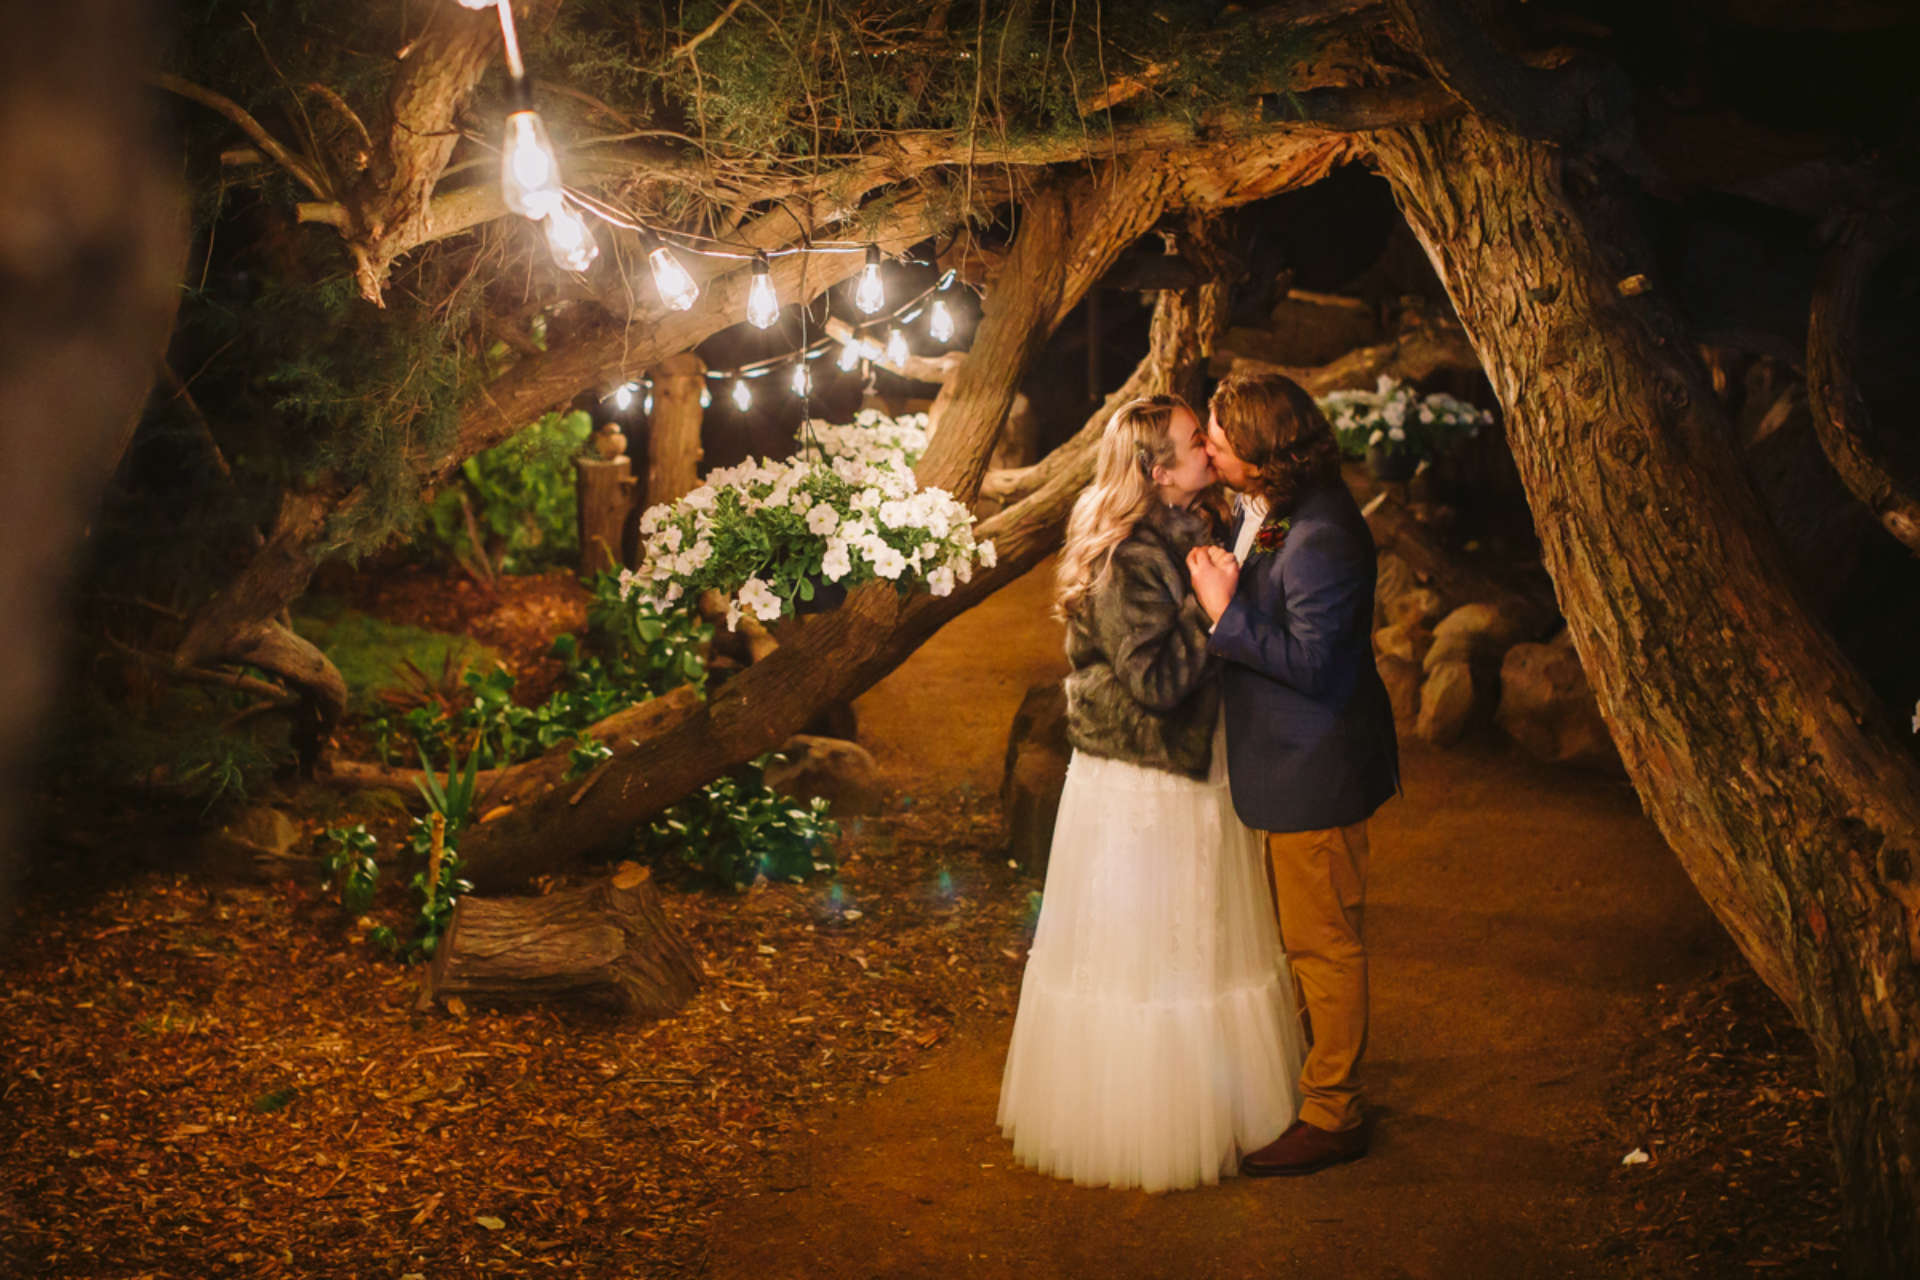 Charming wedding photo under festoon lights amongst the trees in the private garden at Stonefield Estate, near Hobart Tasmania